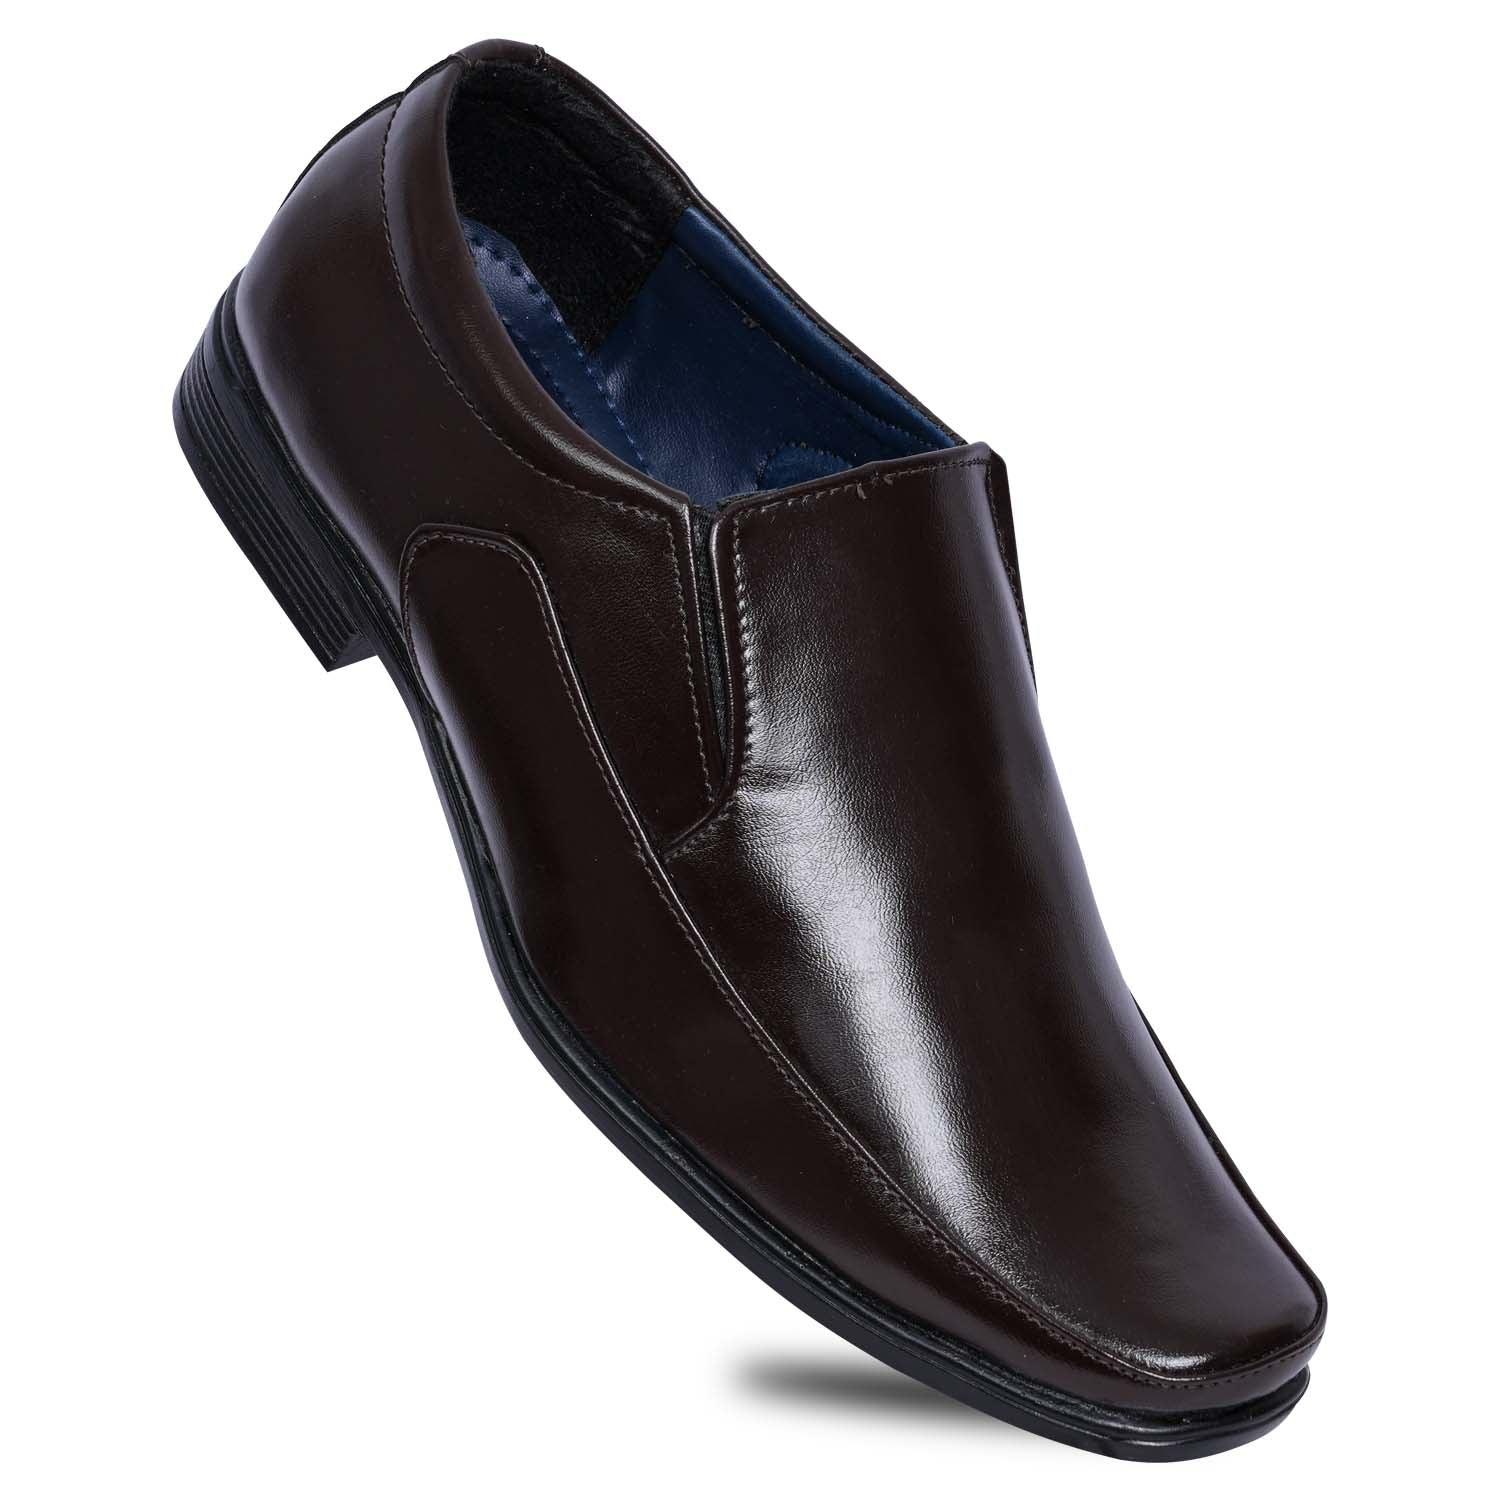 Paragon R2010G Men Formal Shoes | Corporate Office Shoes | Smart &amp; Sleek Design | Comfortable Sole with Cushioning | Daily &amp; Occasion Wear